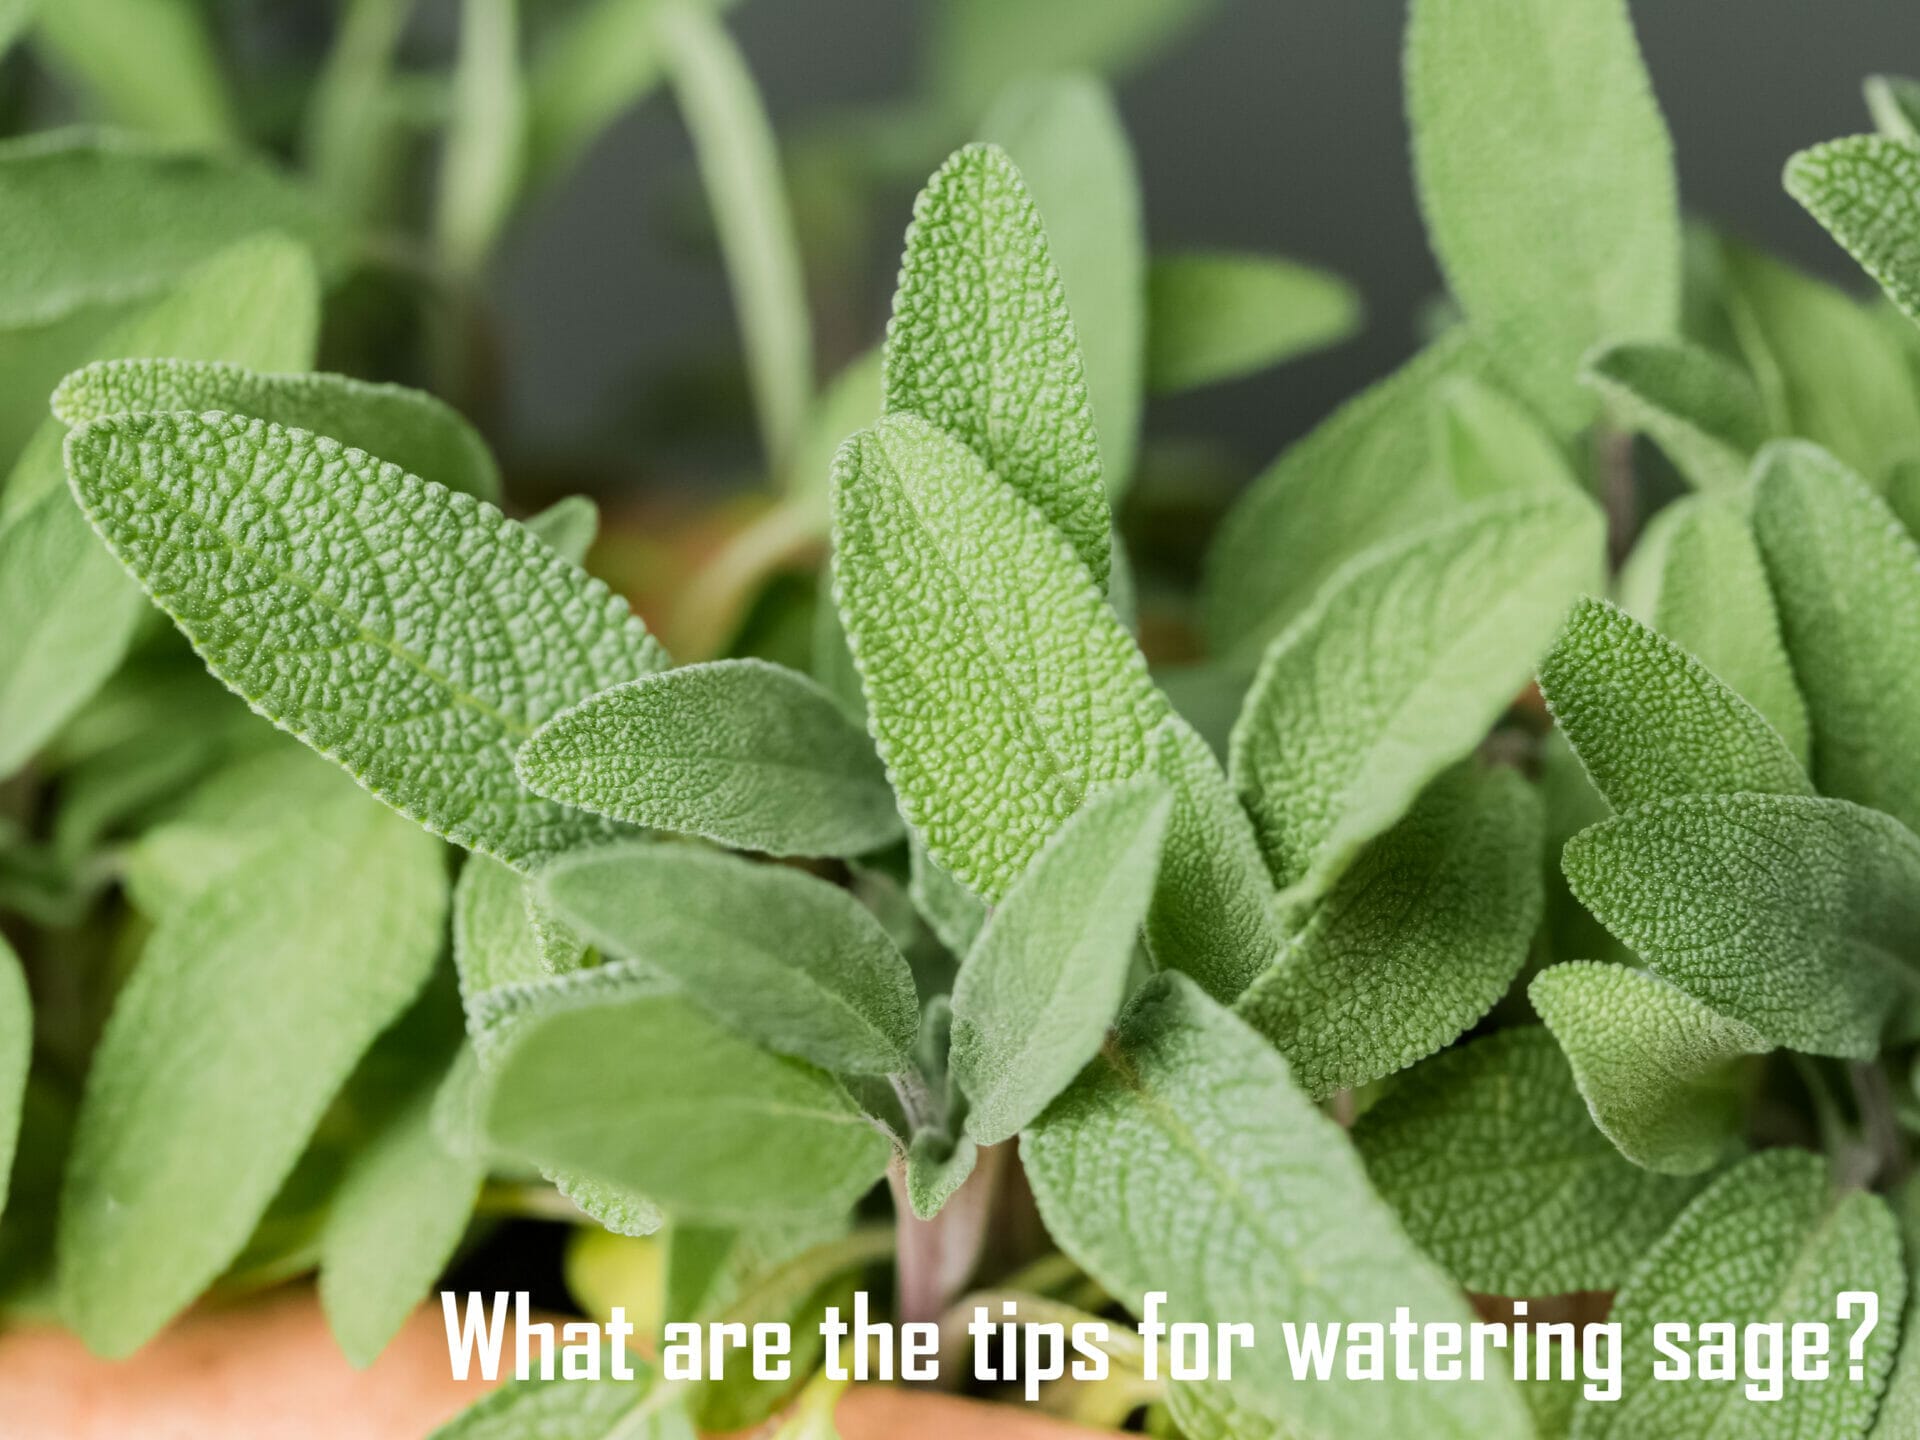 What are the tips for watering sage